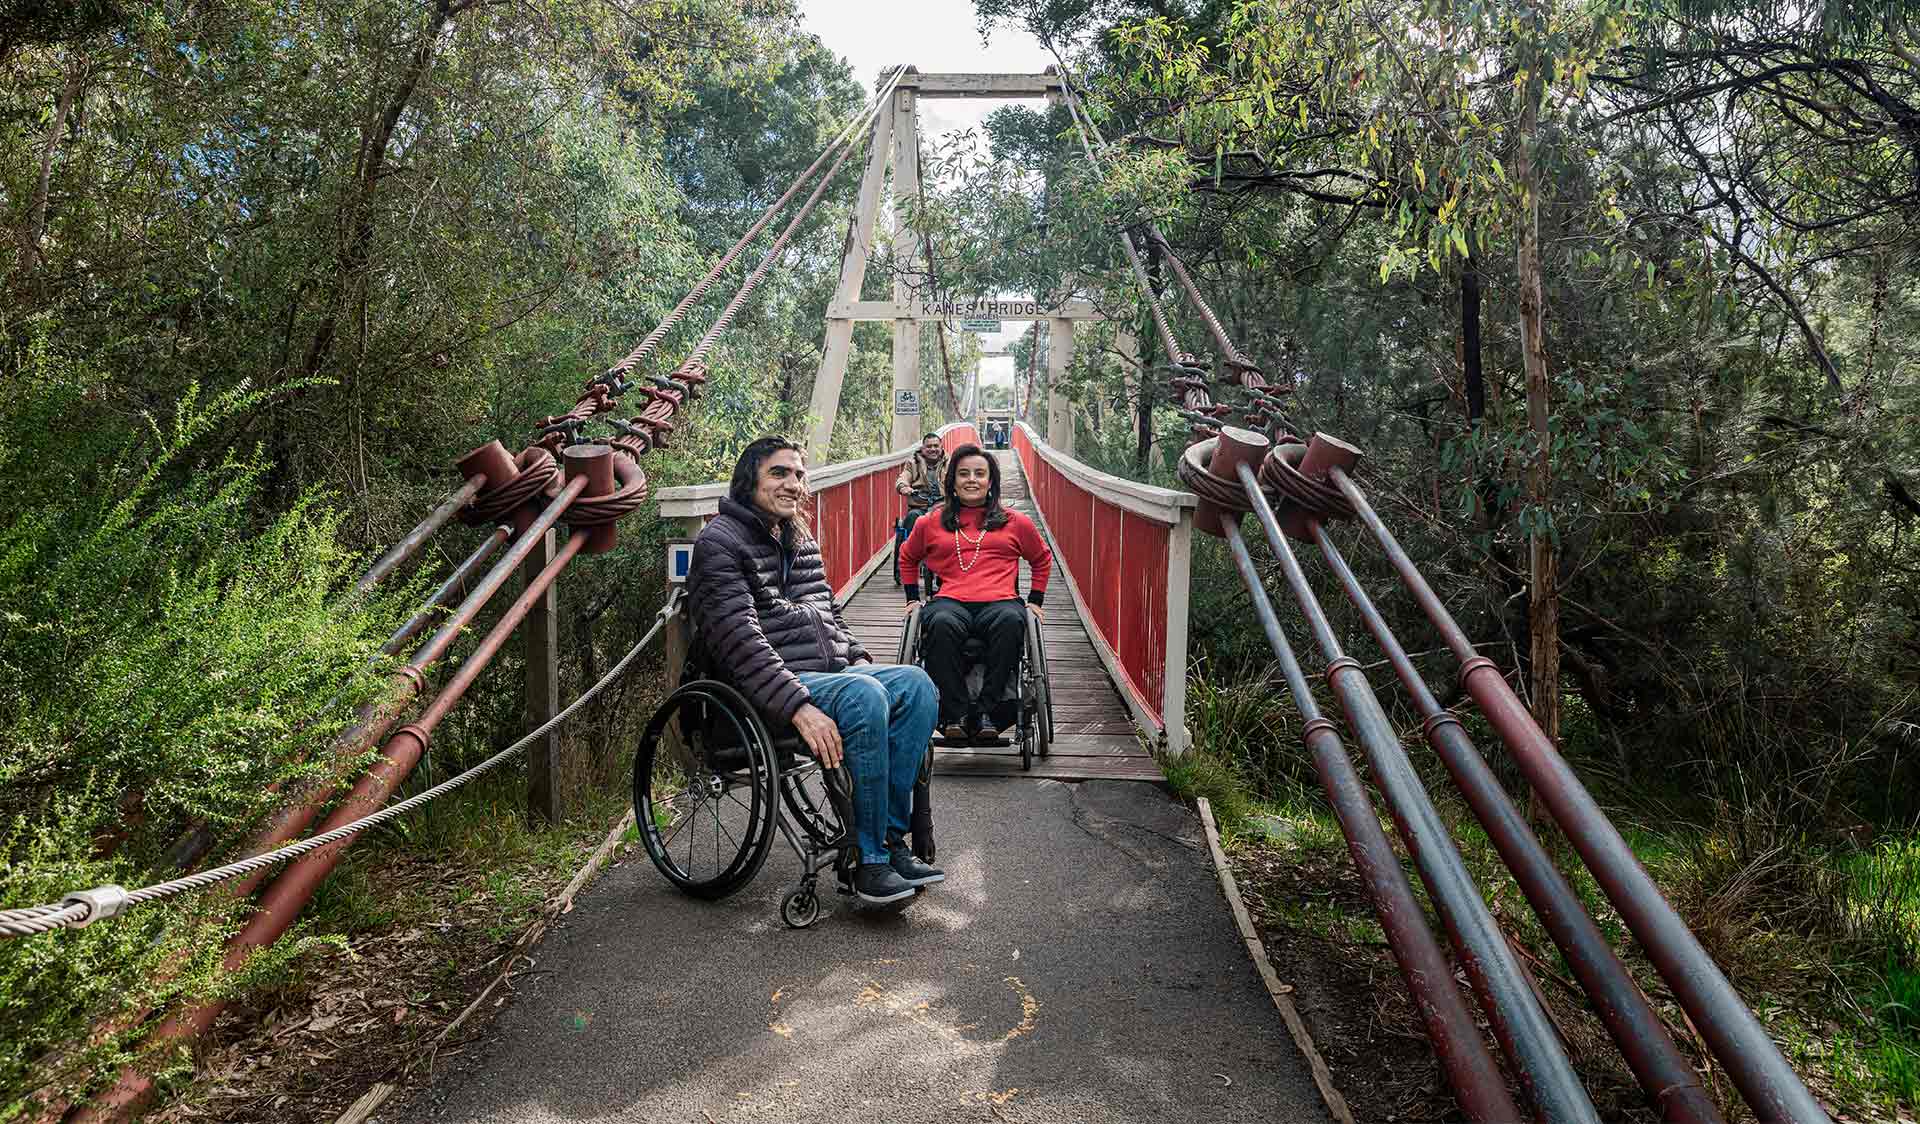 Man in wheelchair waits as his two friends cross accessible Kane's Bridge in Yarra Bend Park. 